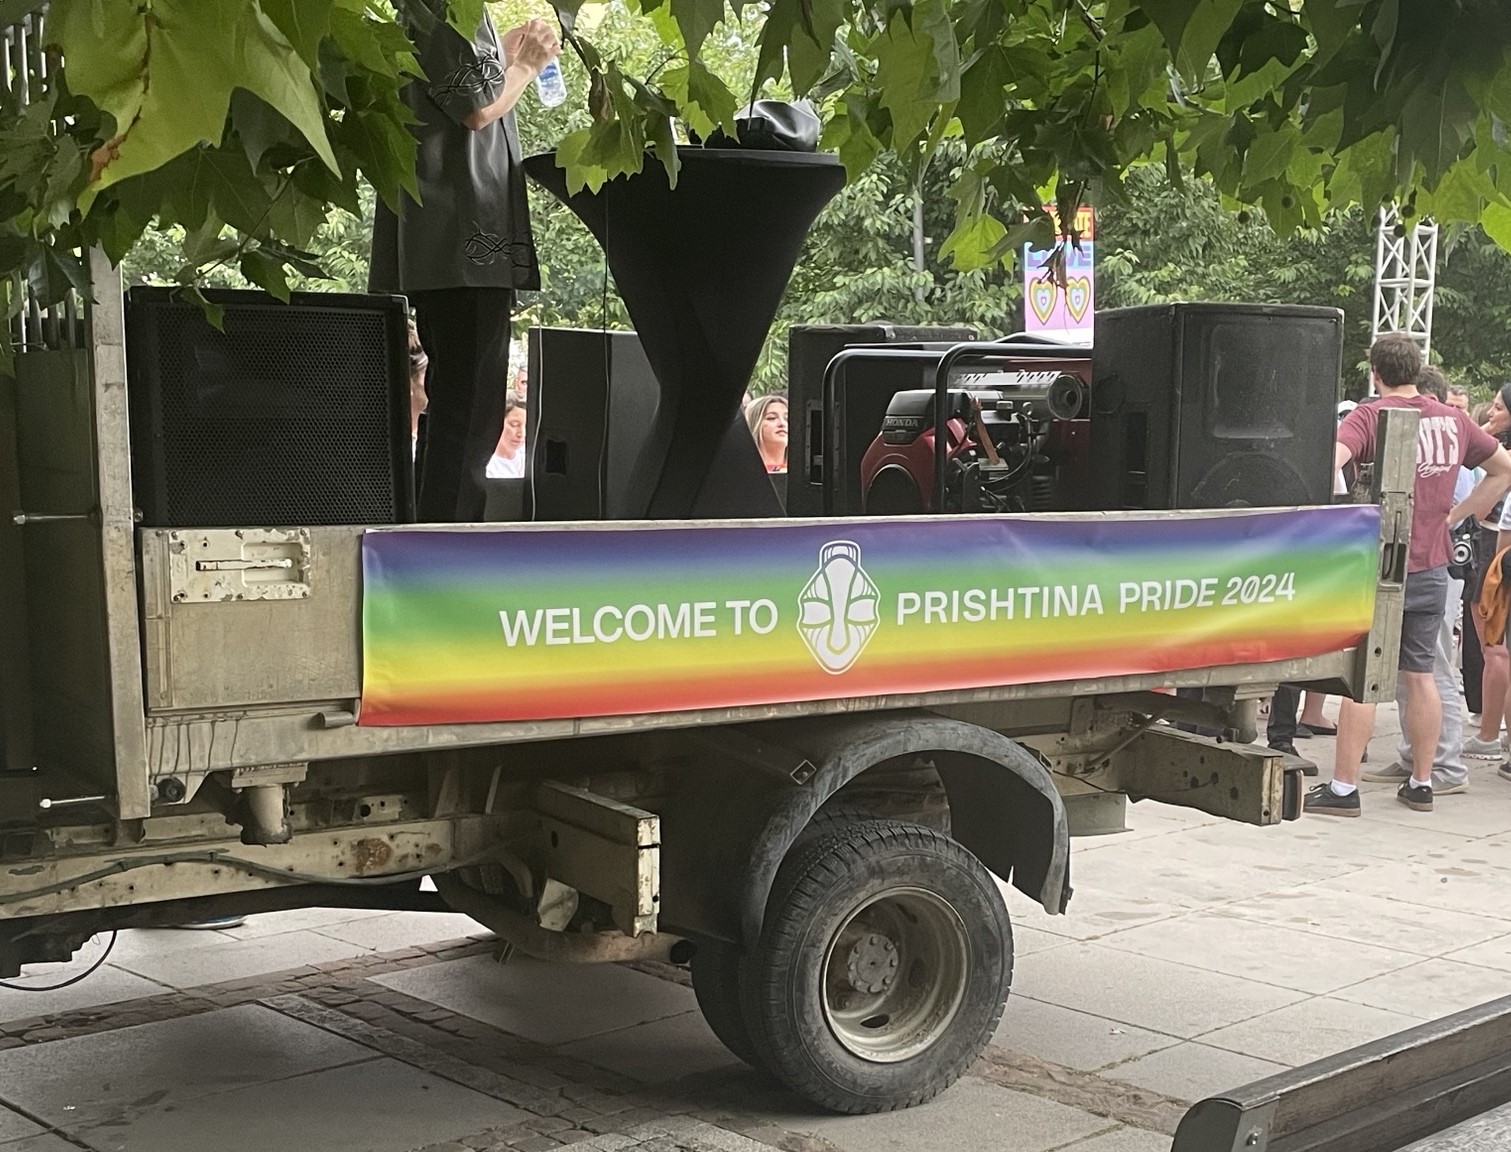 A rainbow sign at the pre-parade rally that says, "Welcome to Prishtina Pride 2024."